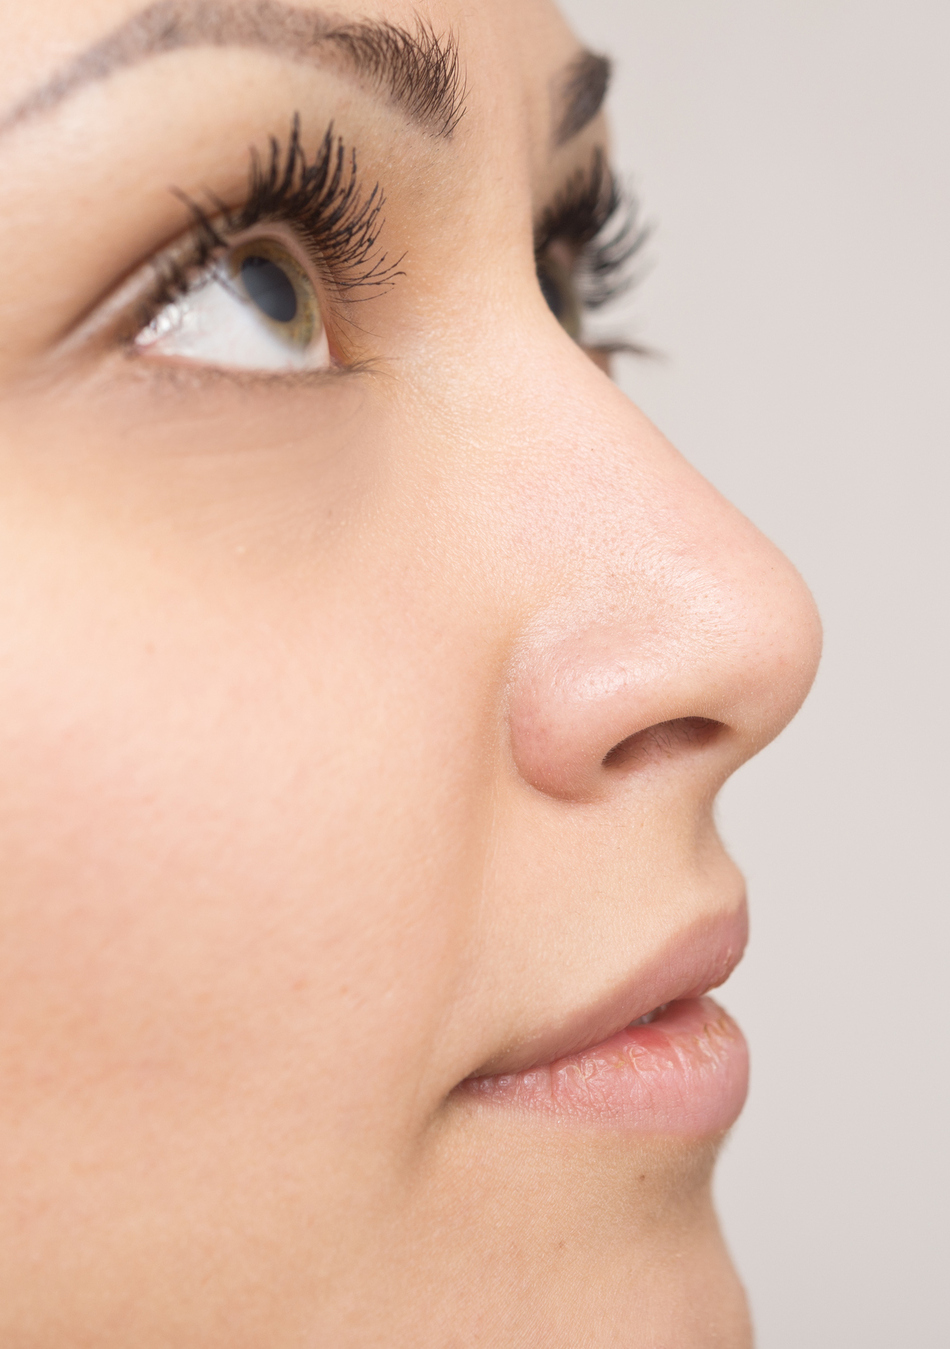 What You Should Know Before Getting a Nose Job